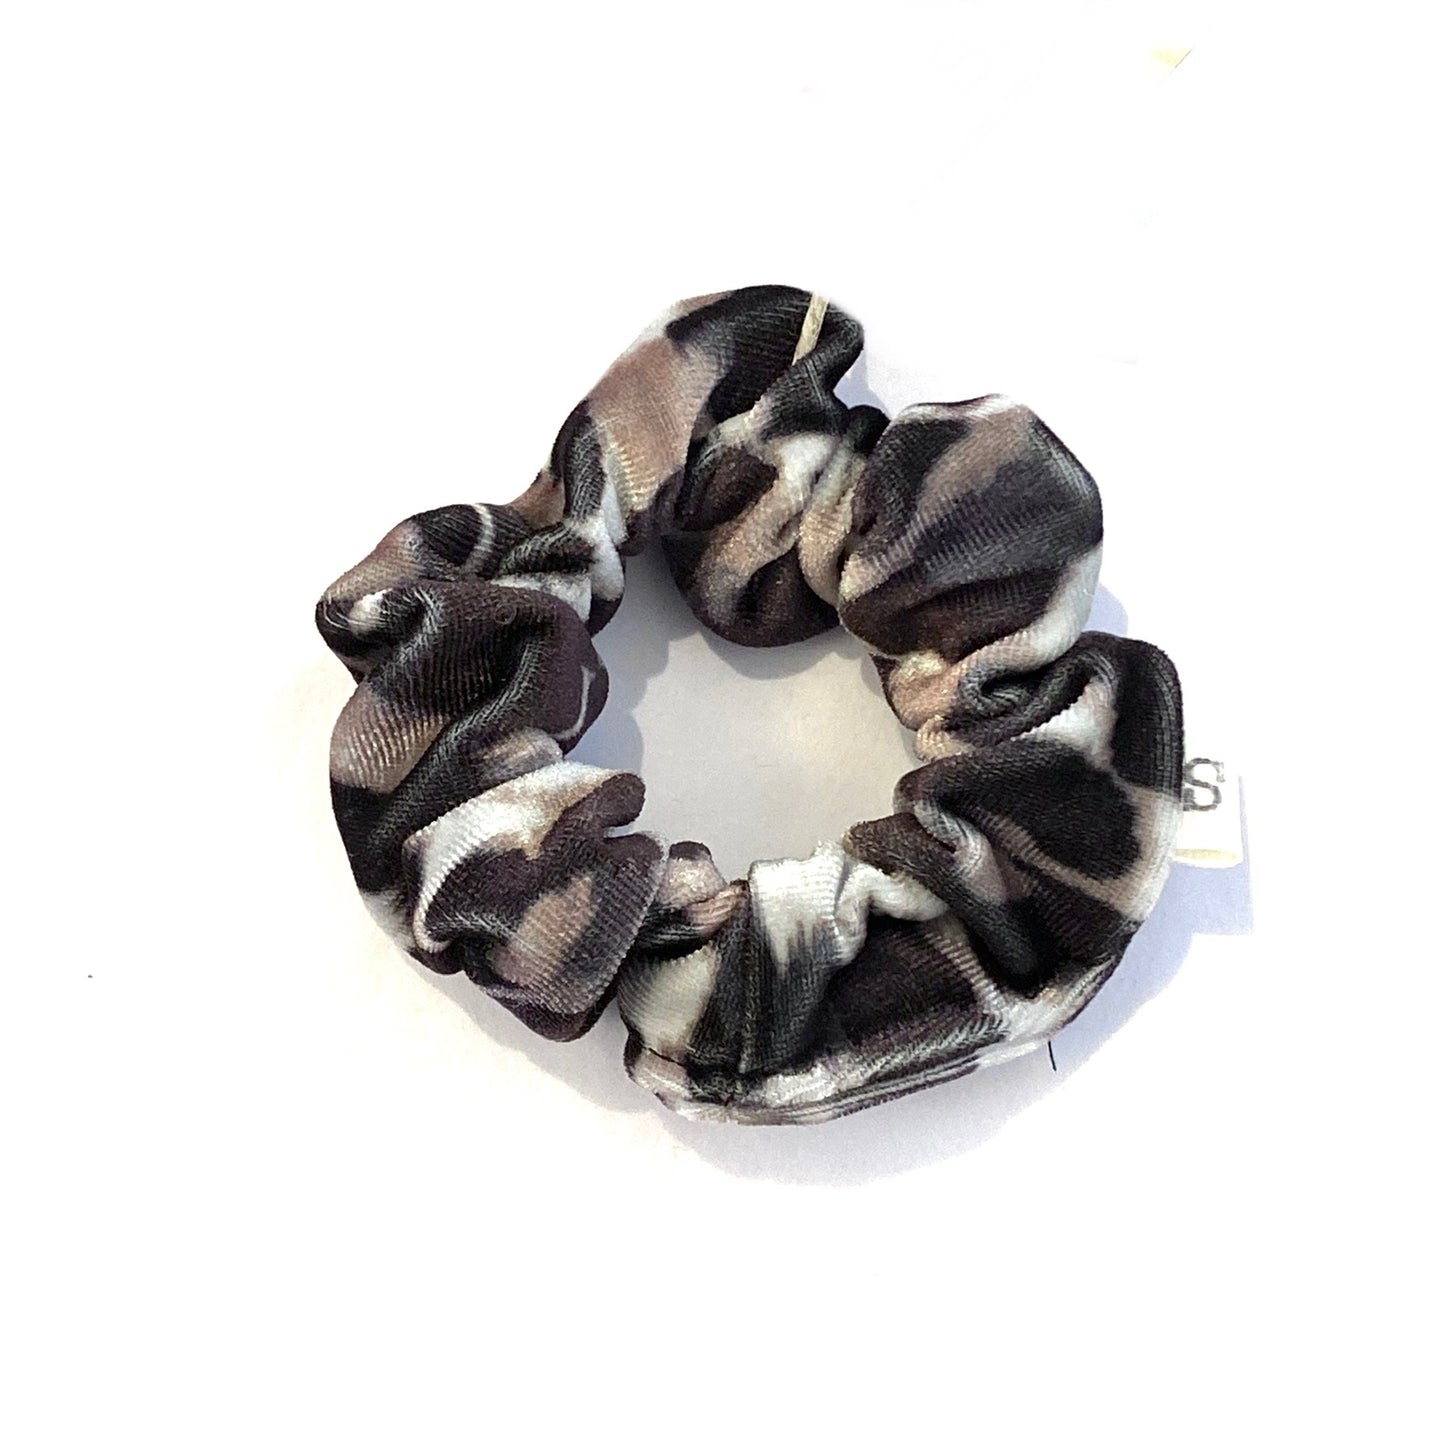 Simply S Products Design Style Scrunchies Skinny